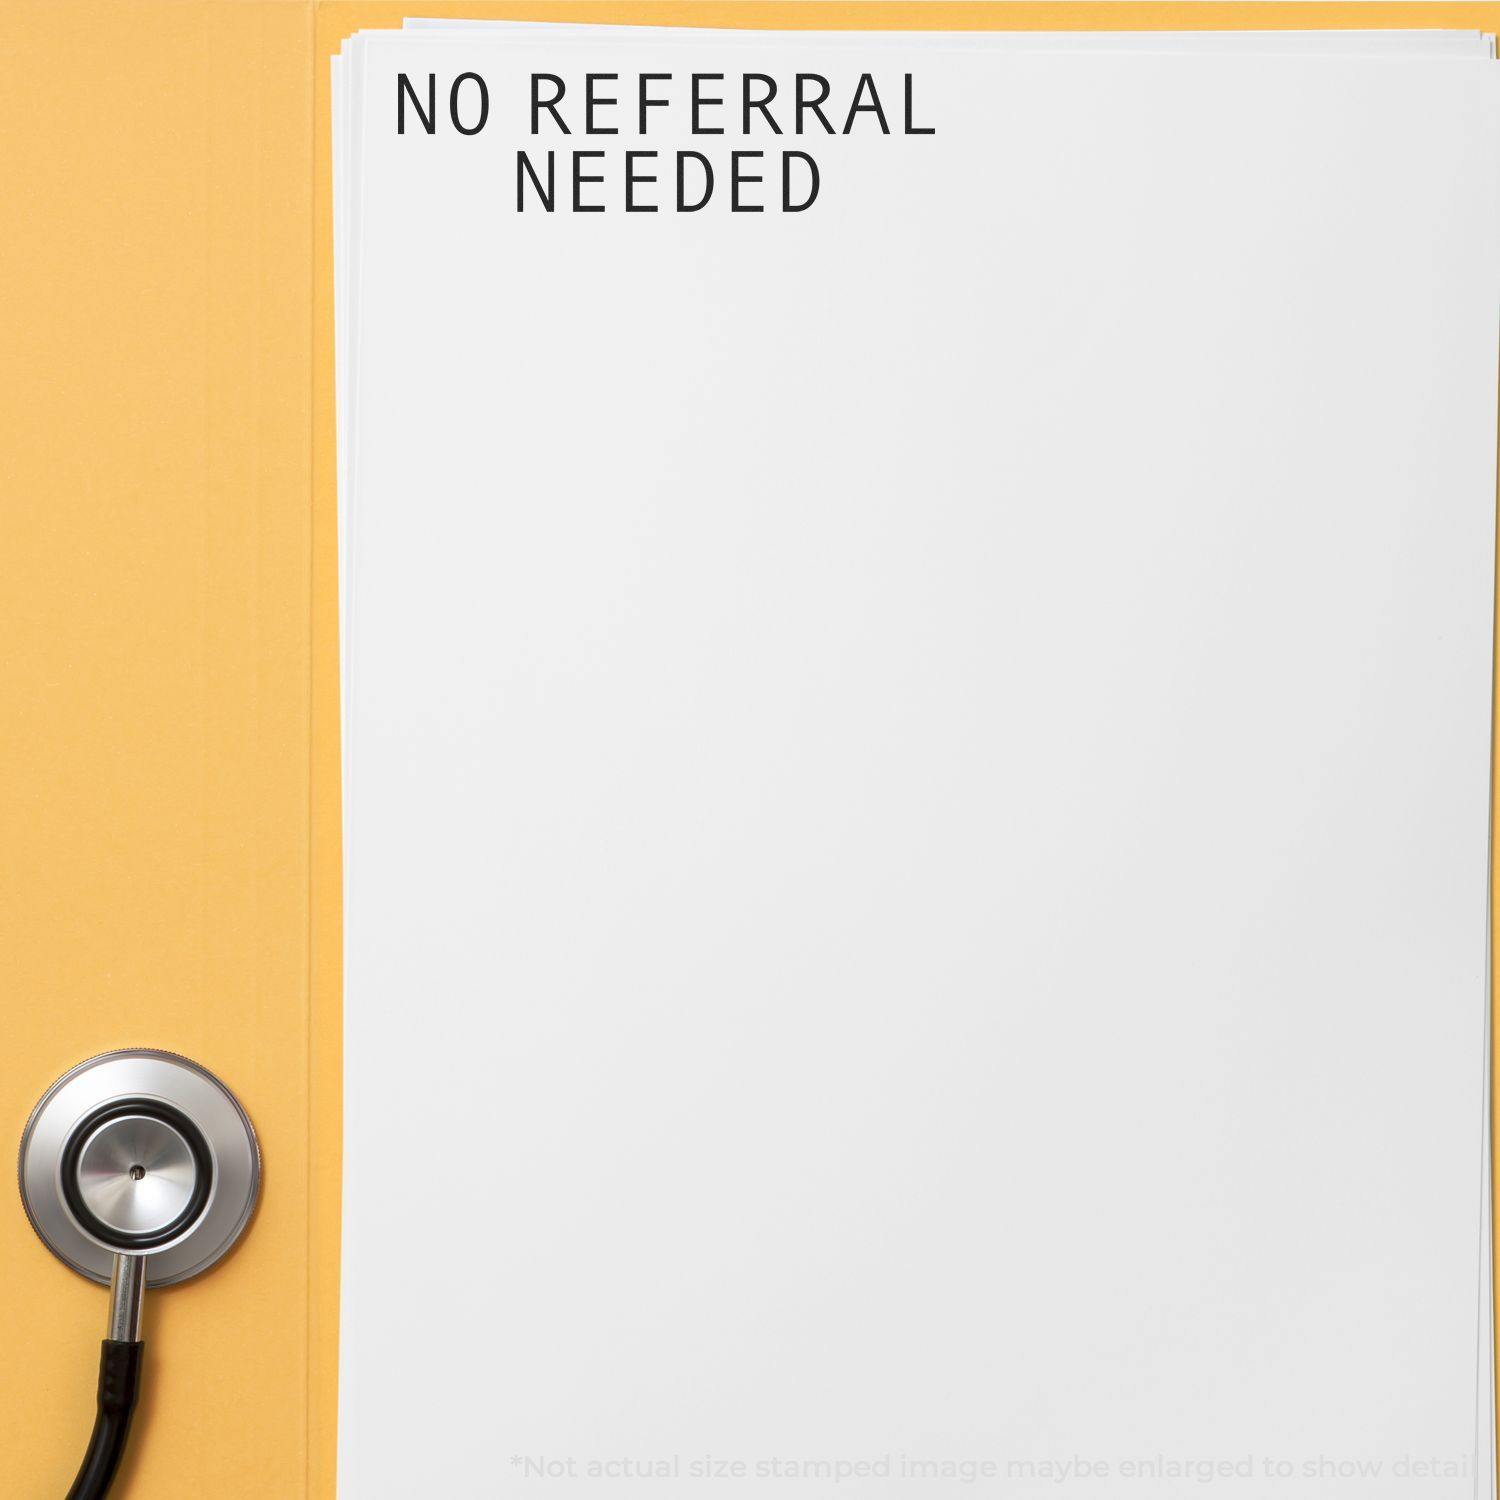 A stock office rubber stamp with a stamped image showing how the text "NO REFERRAL NEEDED" in a large font is displayed after stamping.